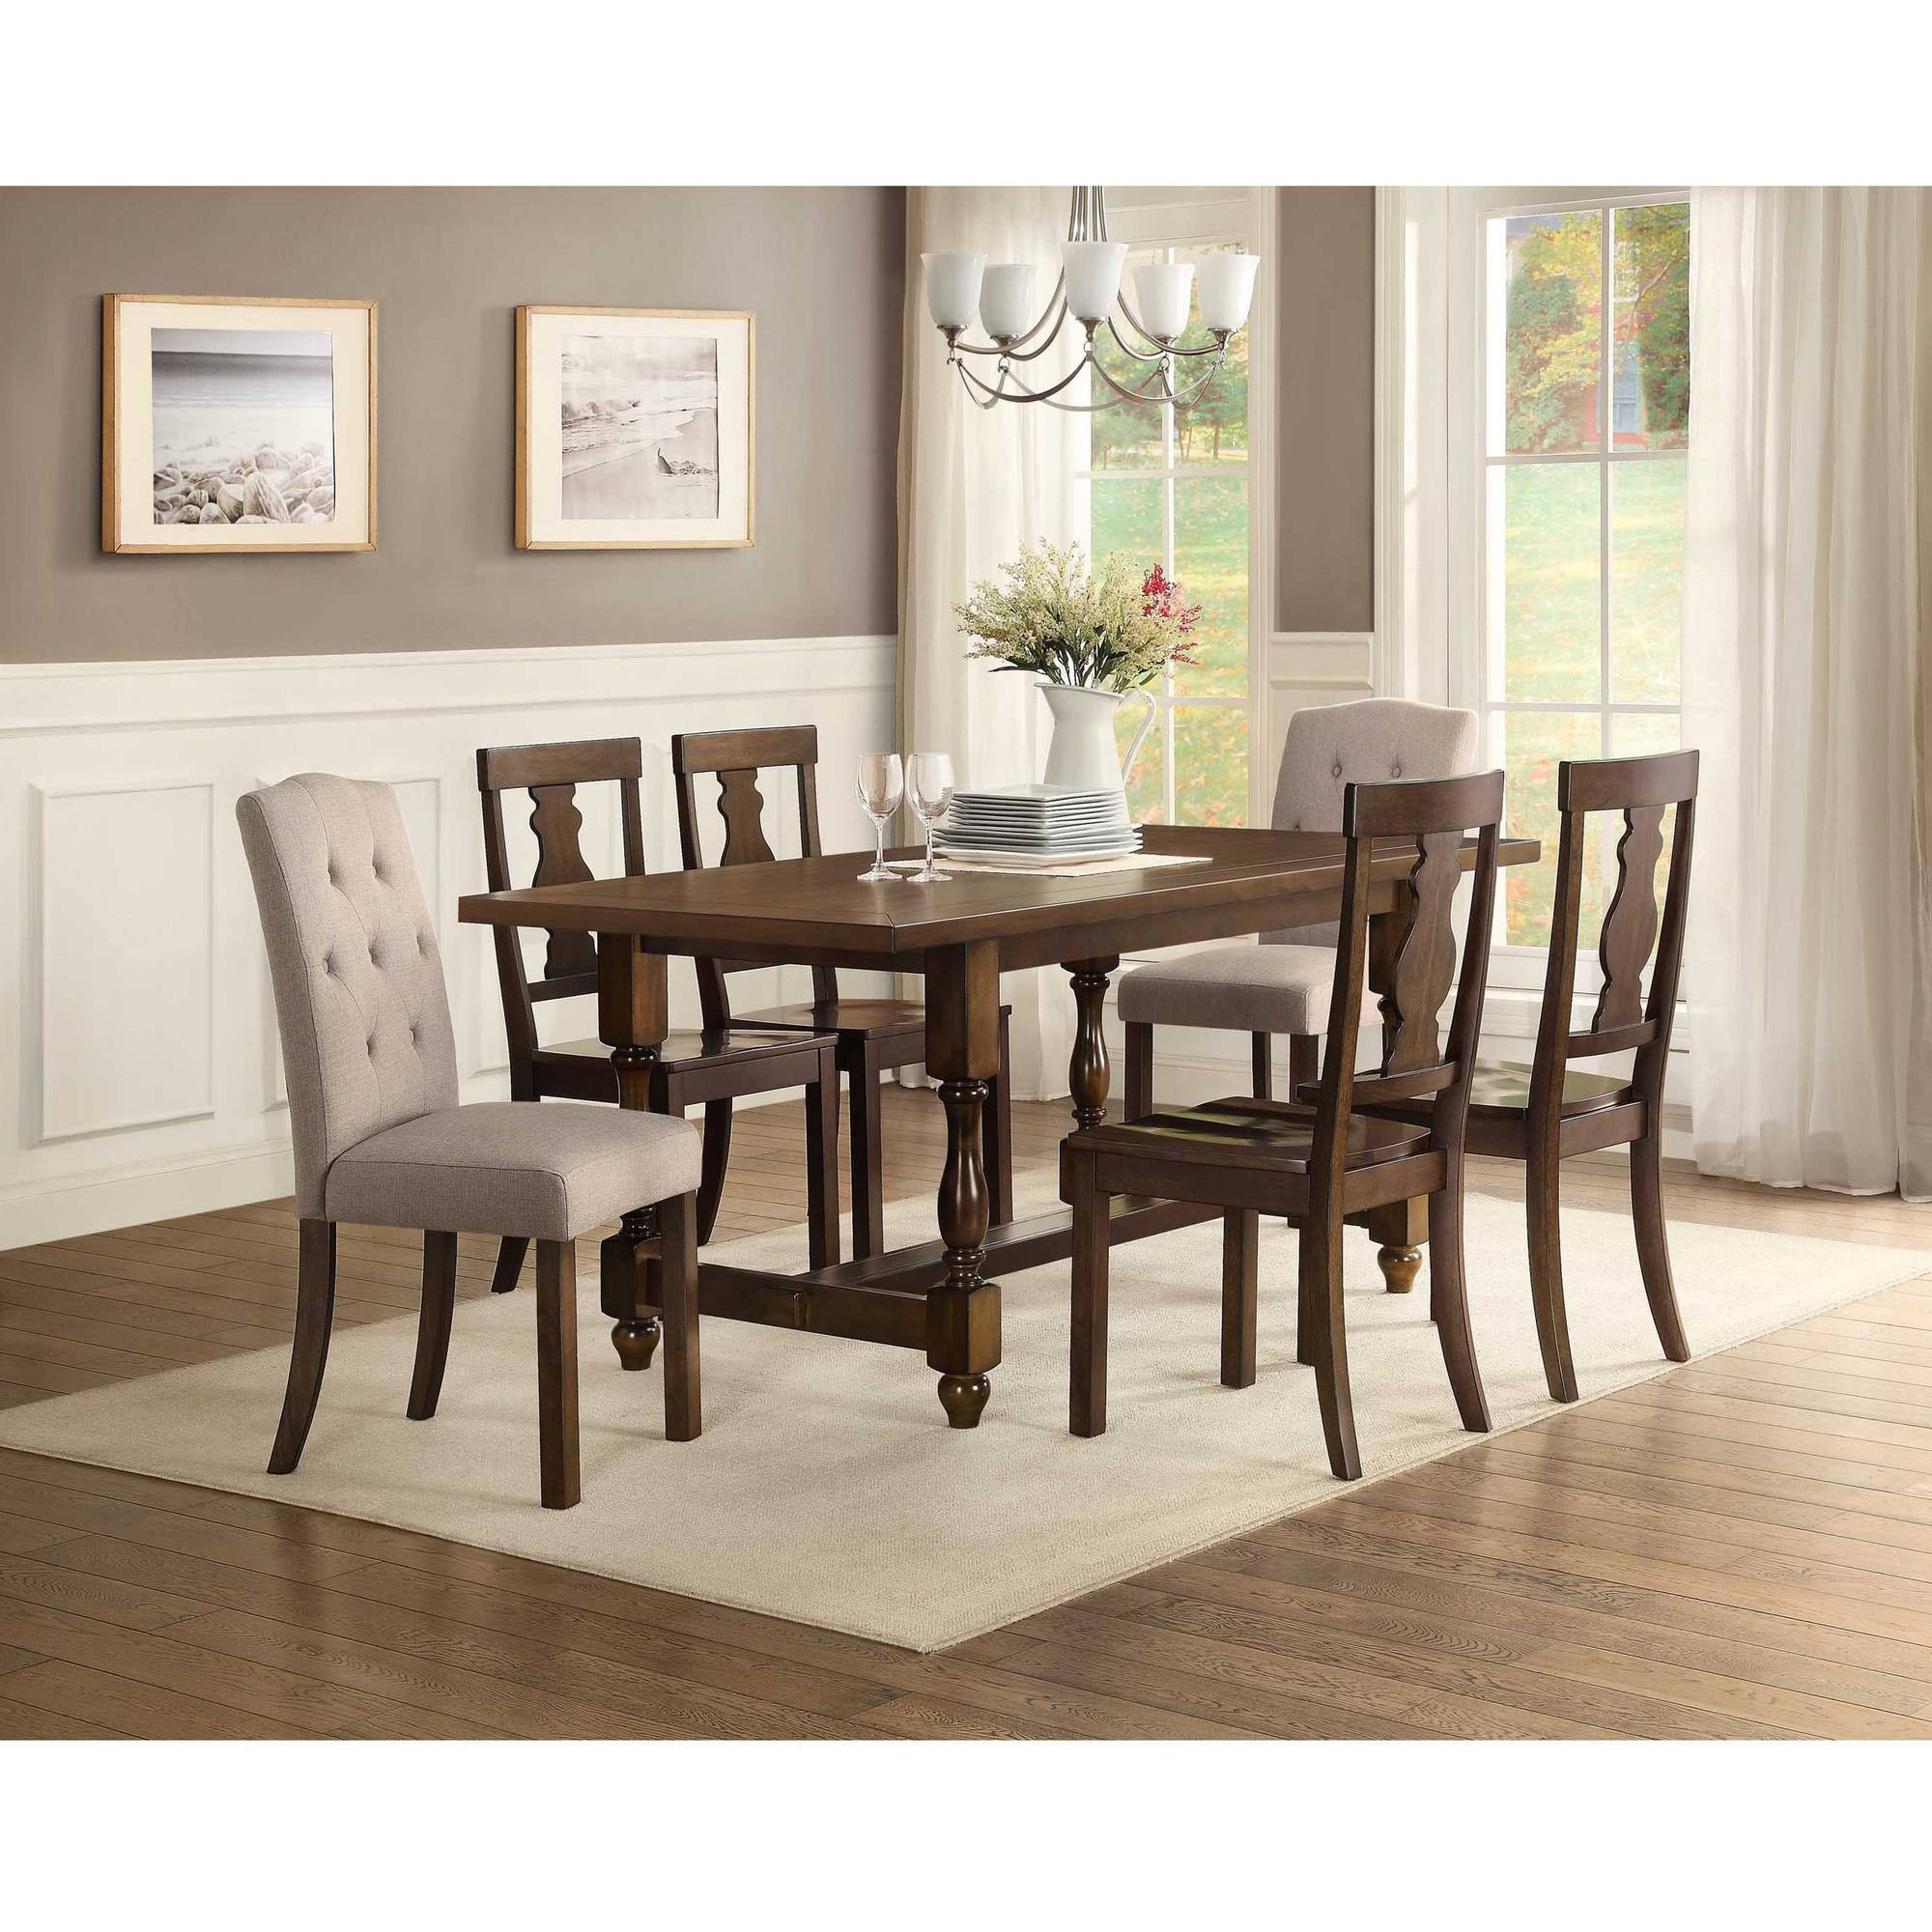 Small Kitchen Table Sets
 Small Kitchen Table with Two Chairs Walmart